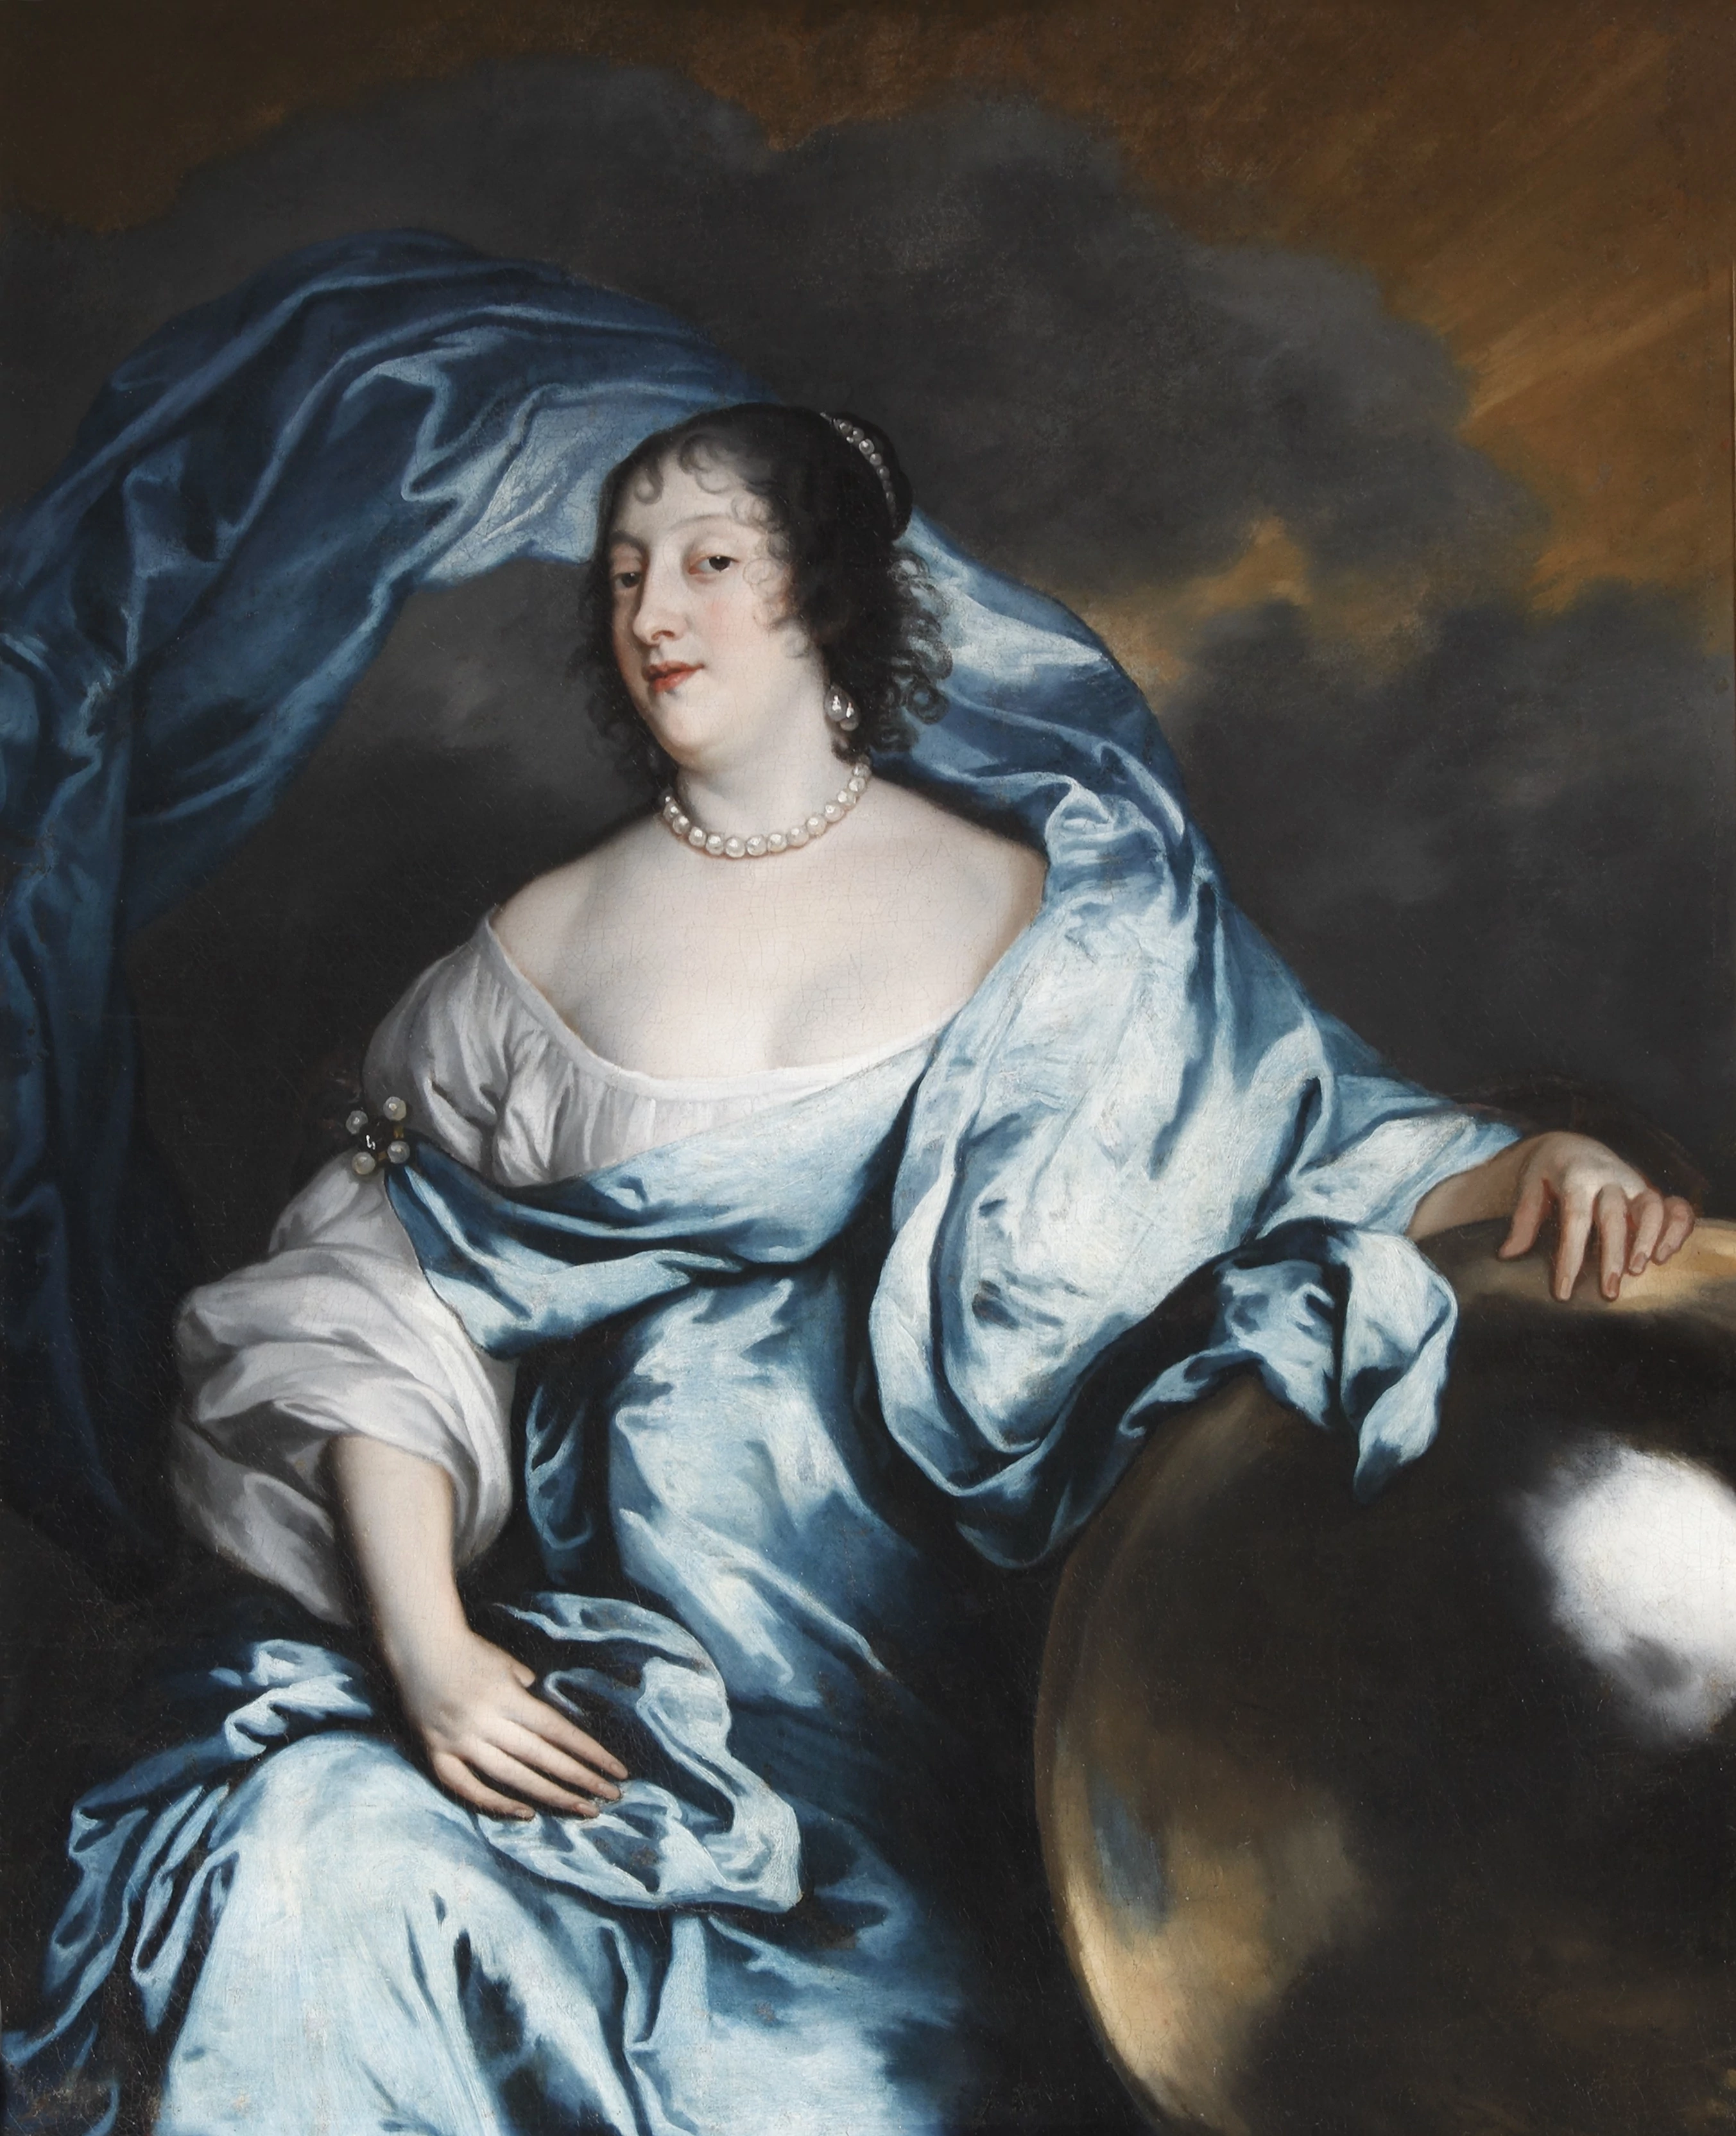 Rachel Wriothesley, Countess of Southampton as Fortune, Anthony van Dyck